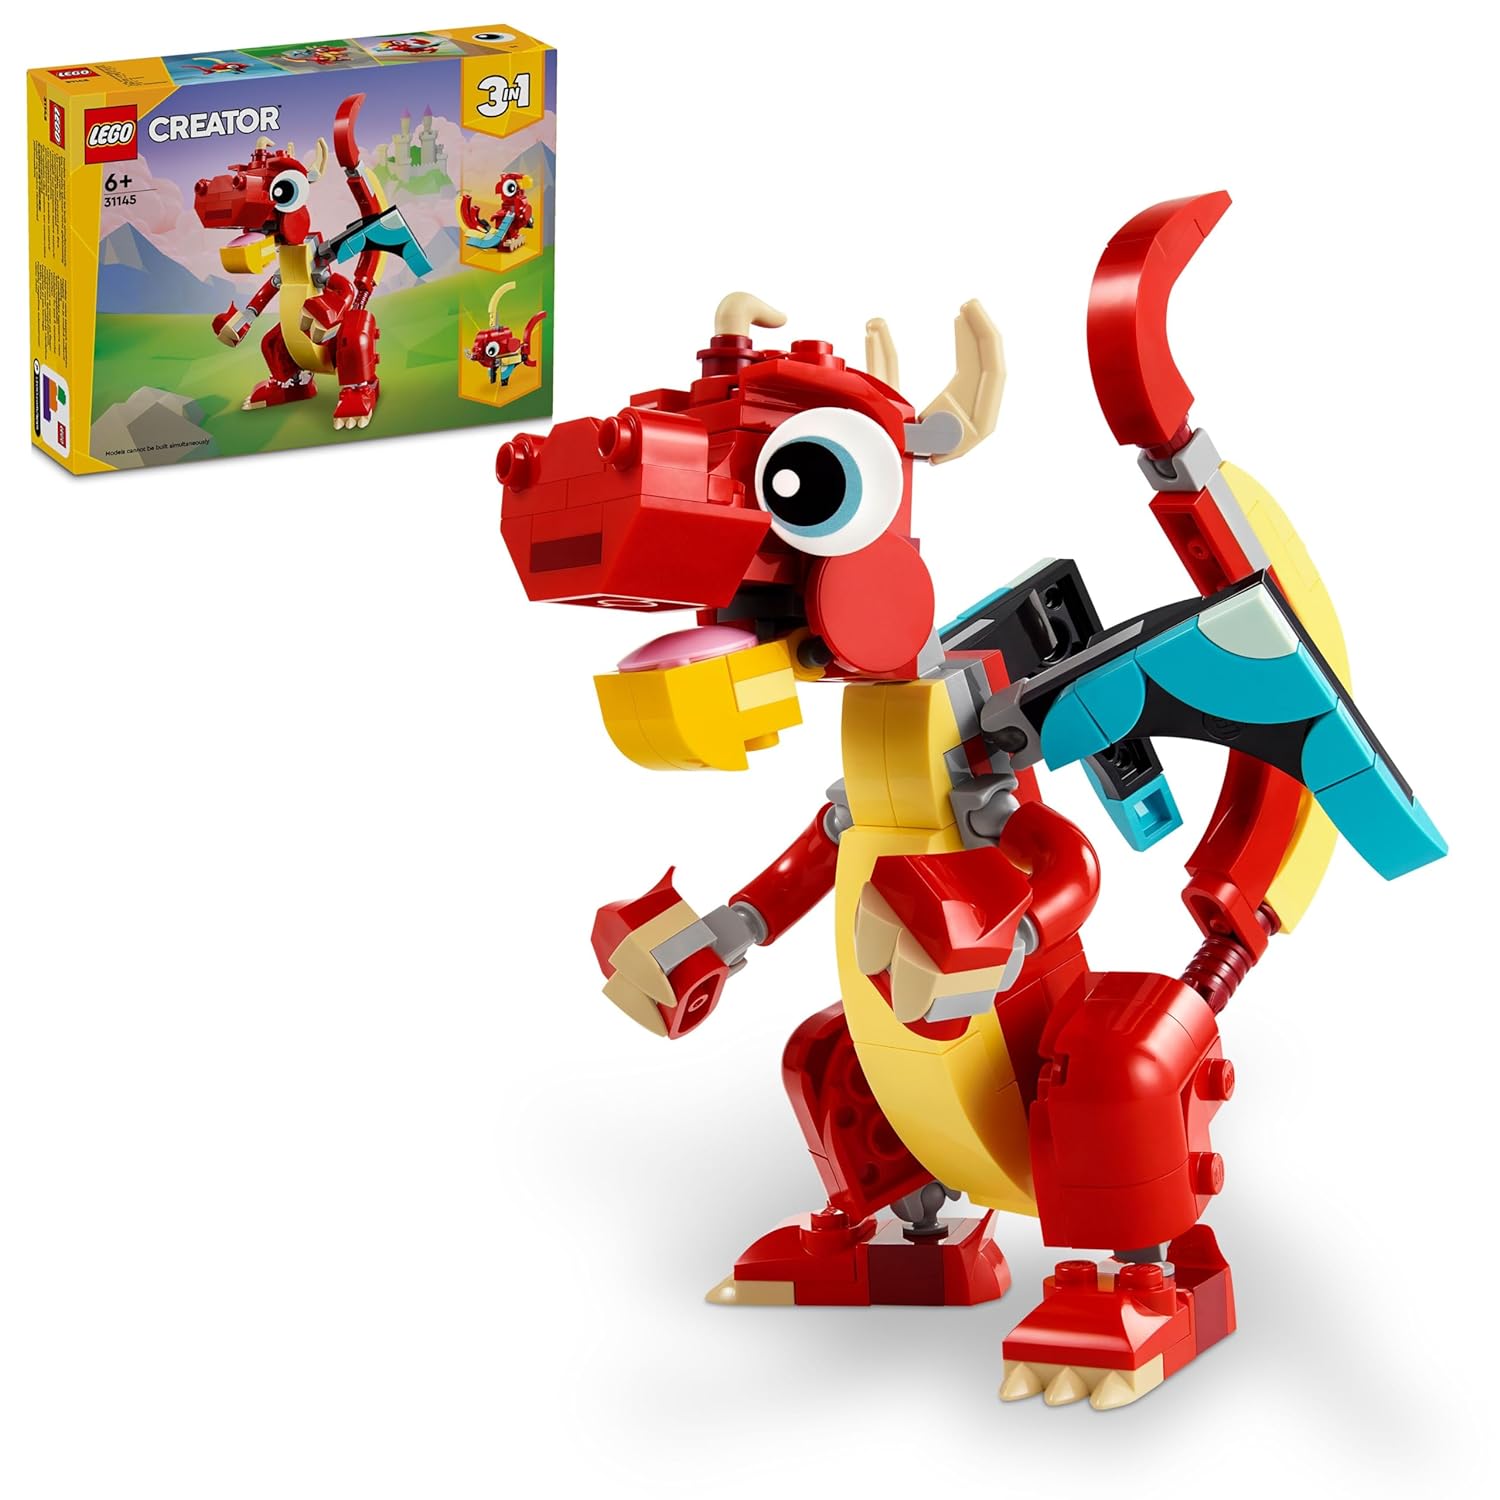 LEGO Creator 3In1 Red Dragon Toy Set Building Kit for Ages 6+